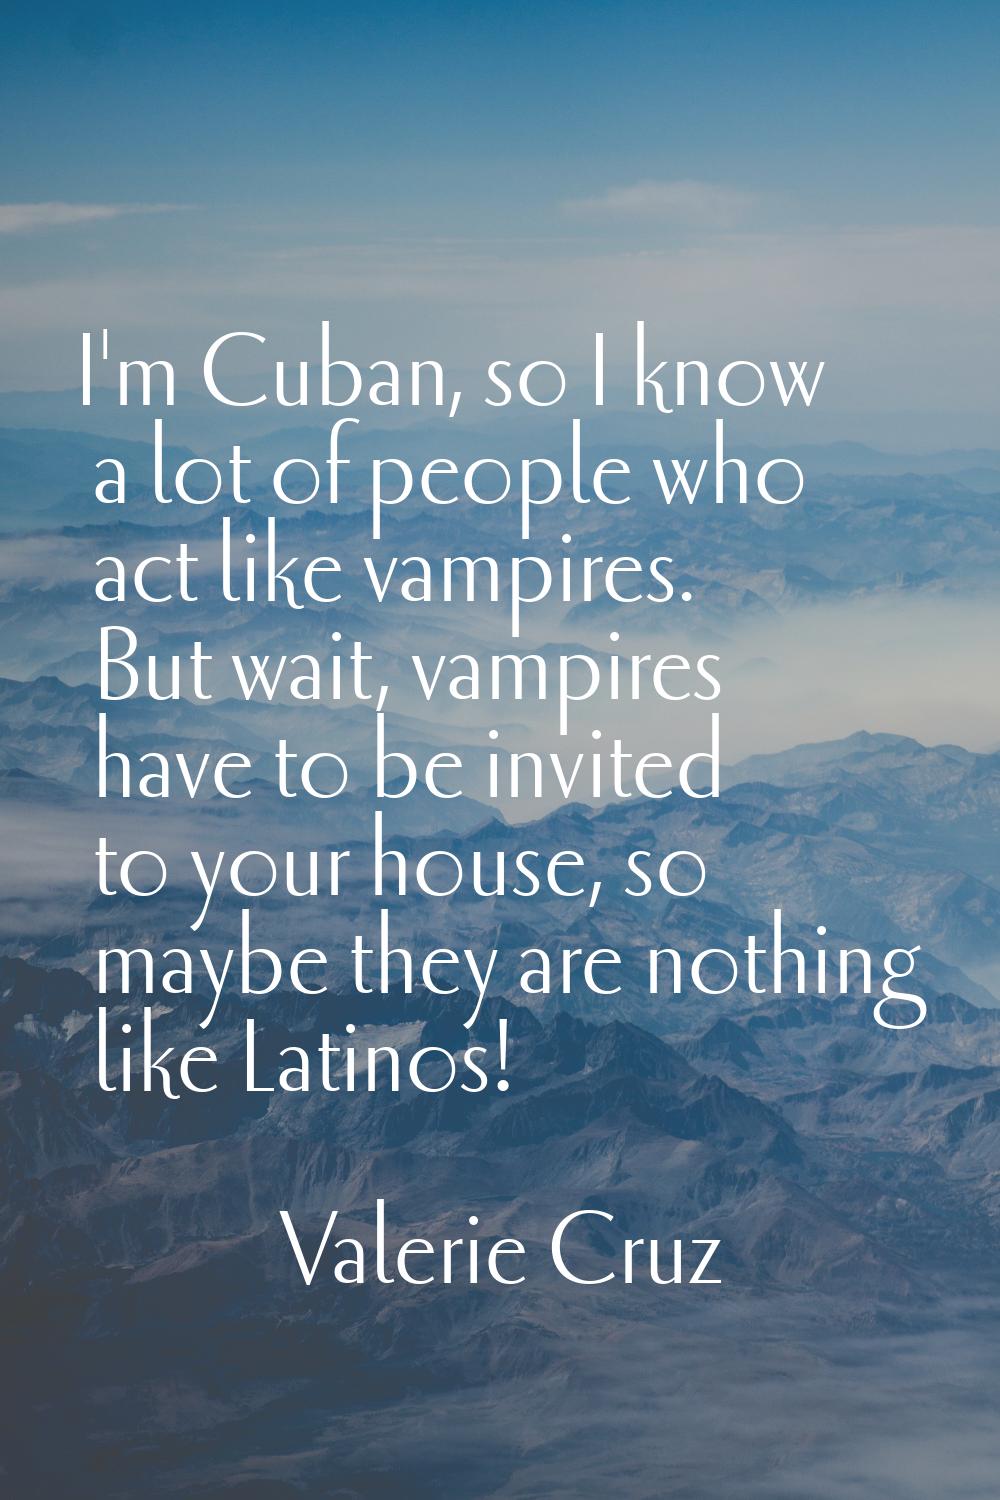 I'm Cuban, so I know a lot of people who act like vampires. But wait, vampires have to be invited t